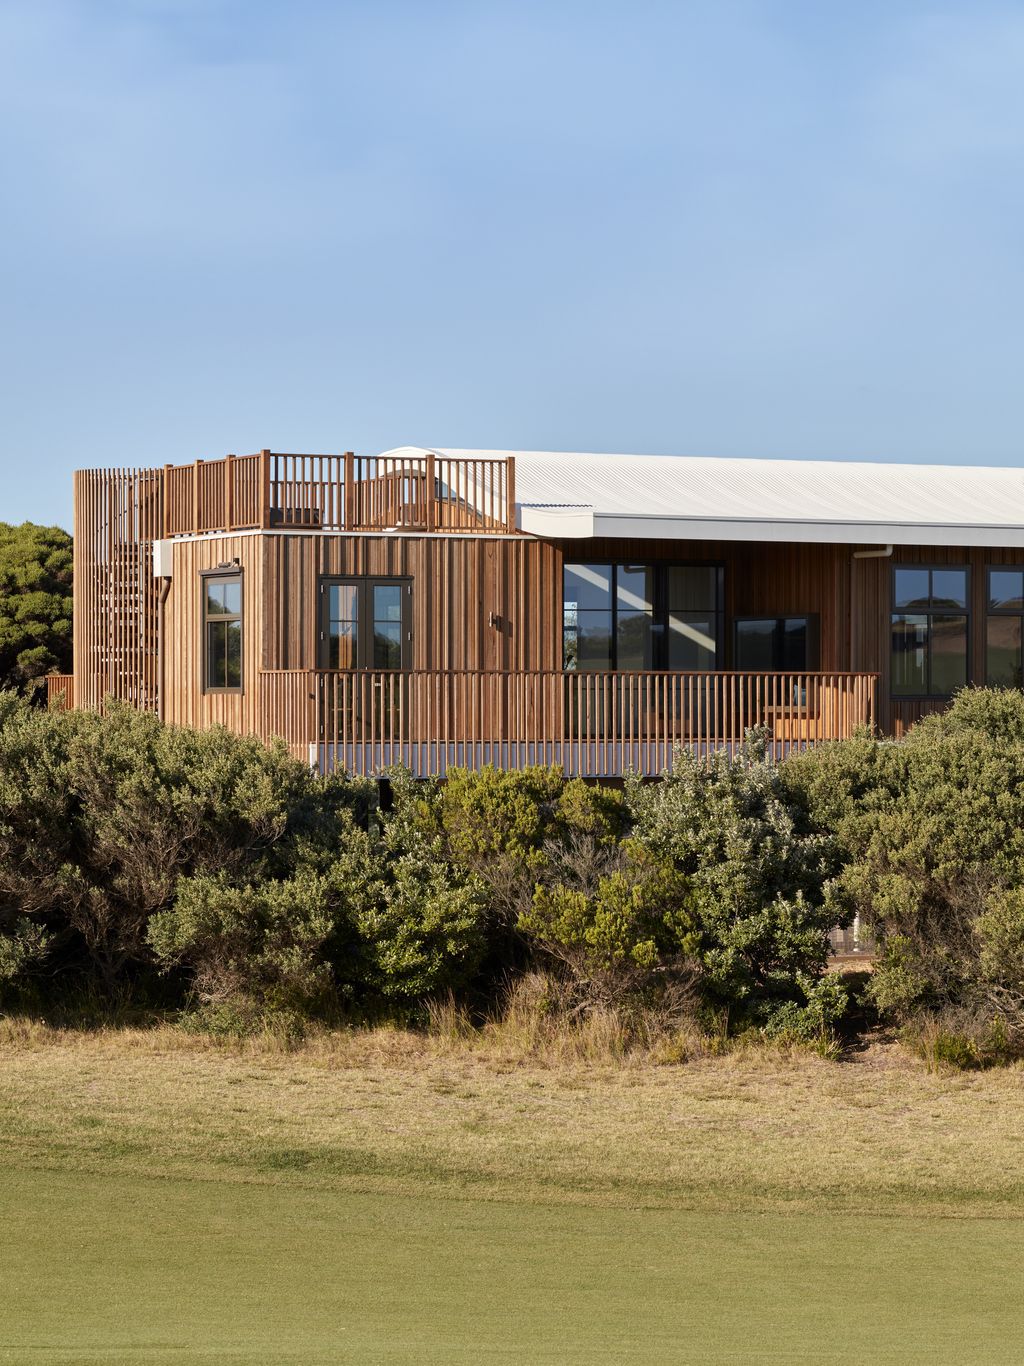 Moonah Tree House, a Prominent Coastal Home by Kirby Architects